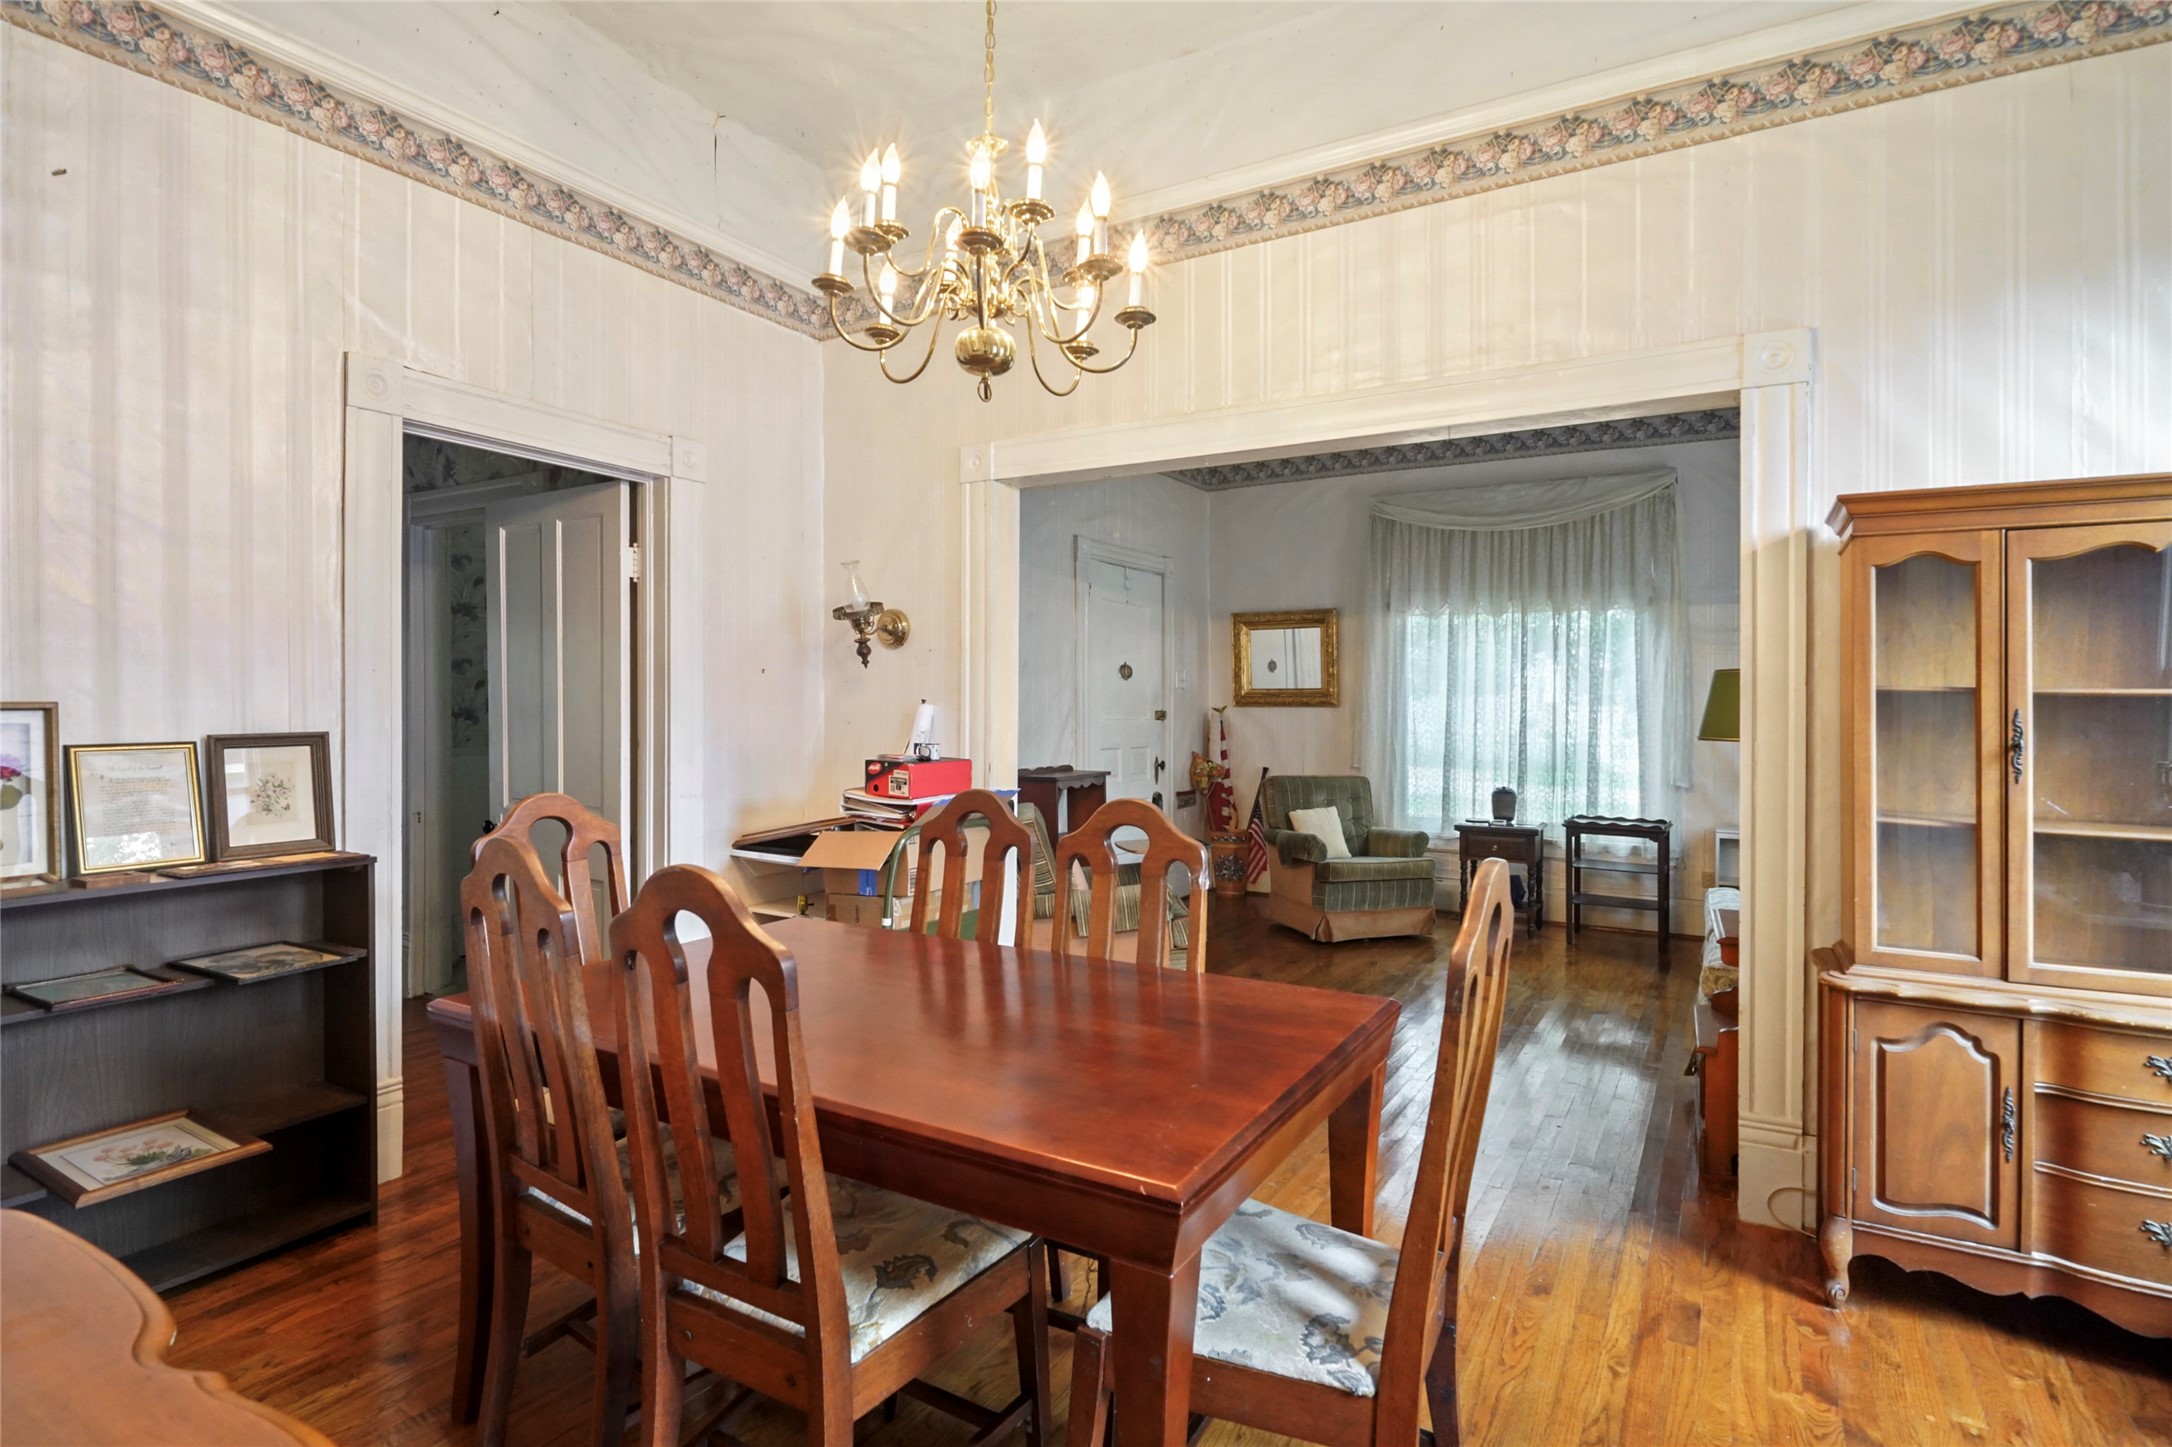 Formal dining area - open to living room - check out the nice wood floors.